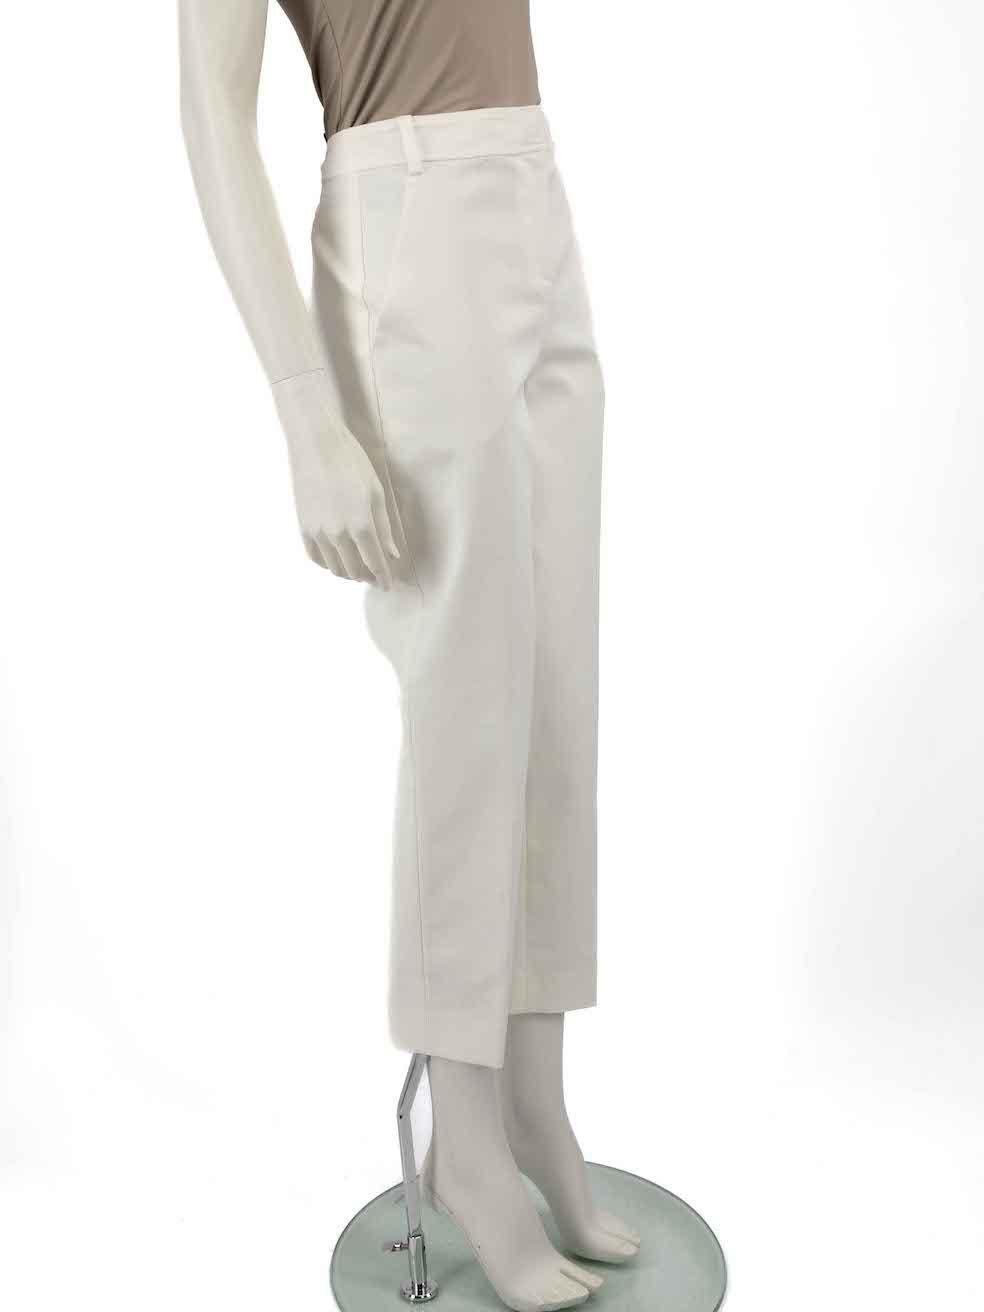 CONDITION is Very good. Minimal wear to trousers is evident. Minimal wear to the front with a discoloured on this used St. John designer resale item.
 
 
 
 Details
 
 
 White
 
 Cotton
 
 Trousers
 
 Slim fit
 
 Cropped
 
 Mid rise
 
 2x Side